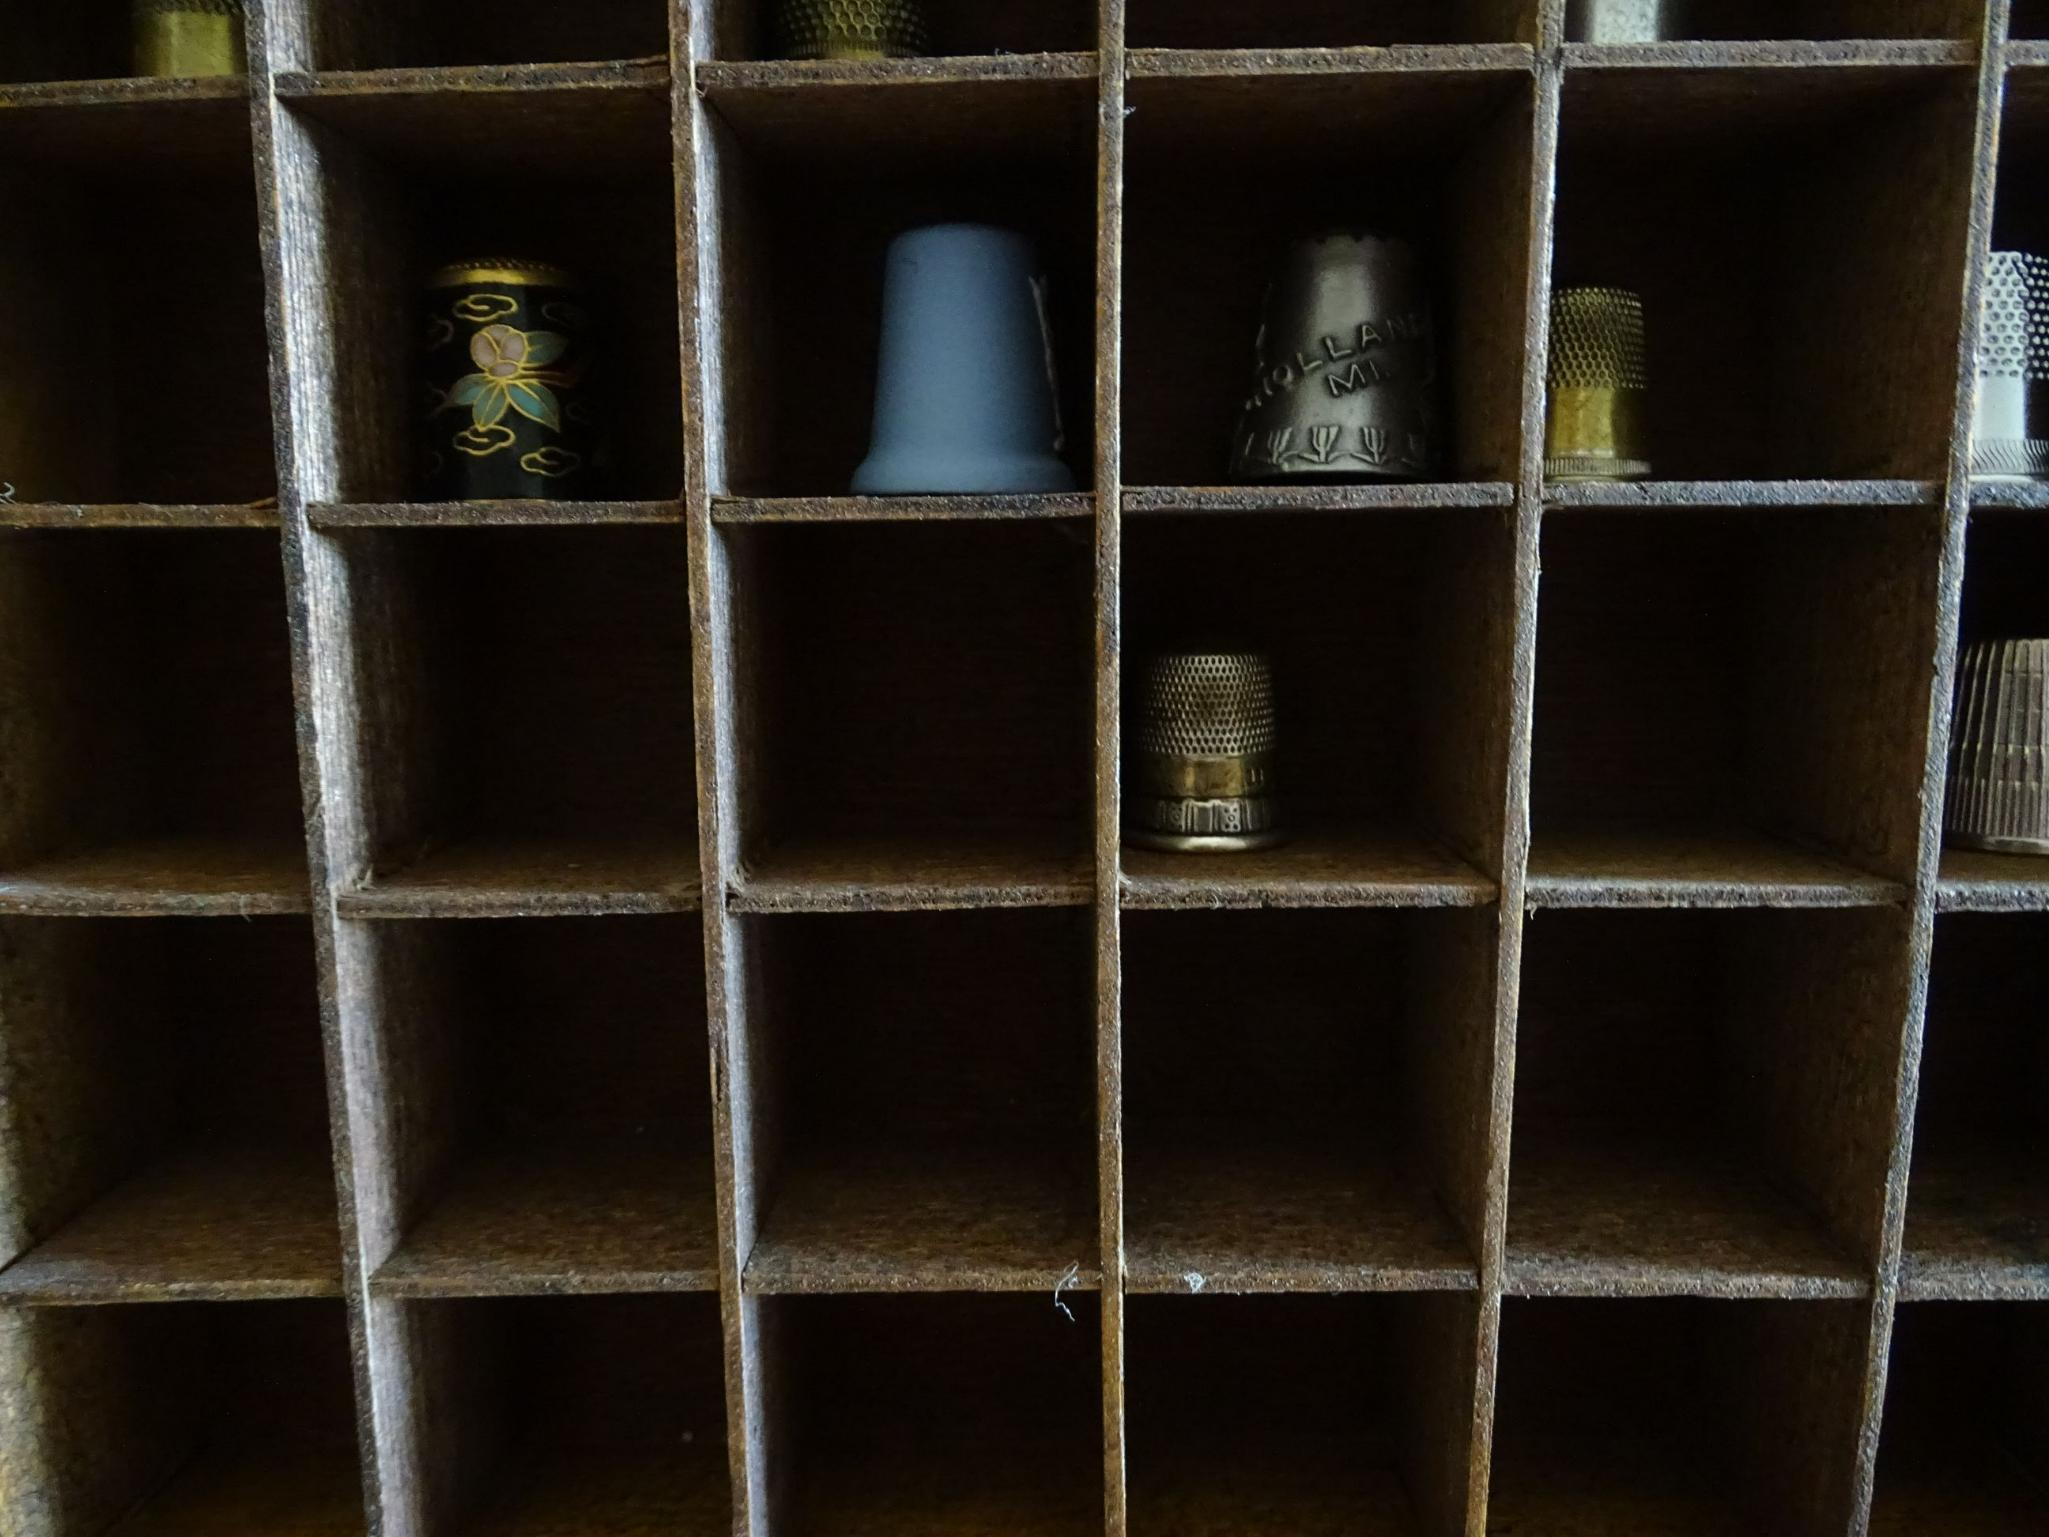 Knick knack Shelf with Thimble Collection